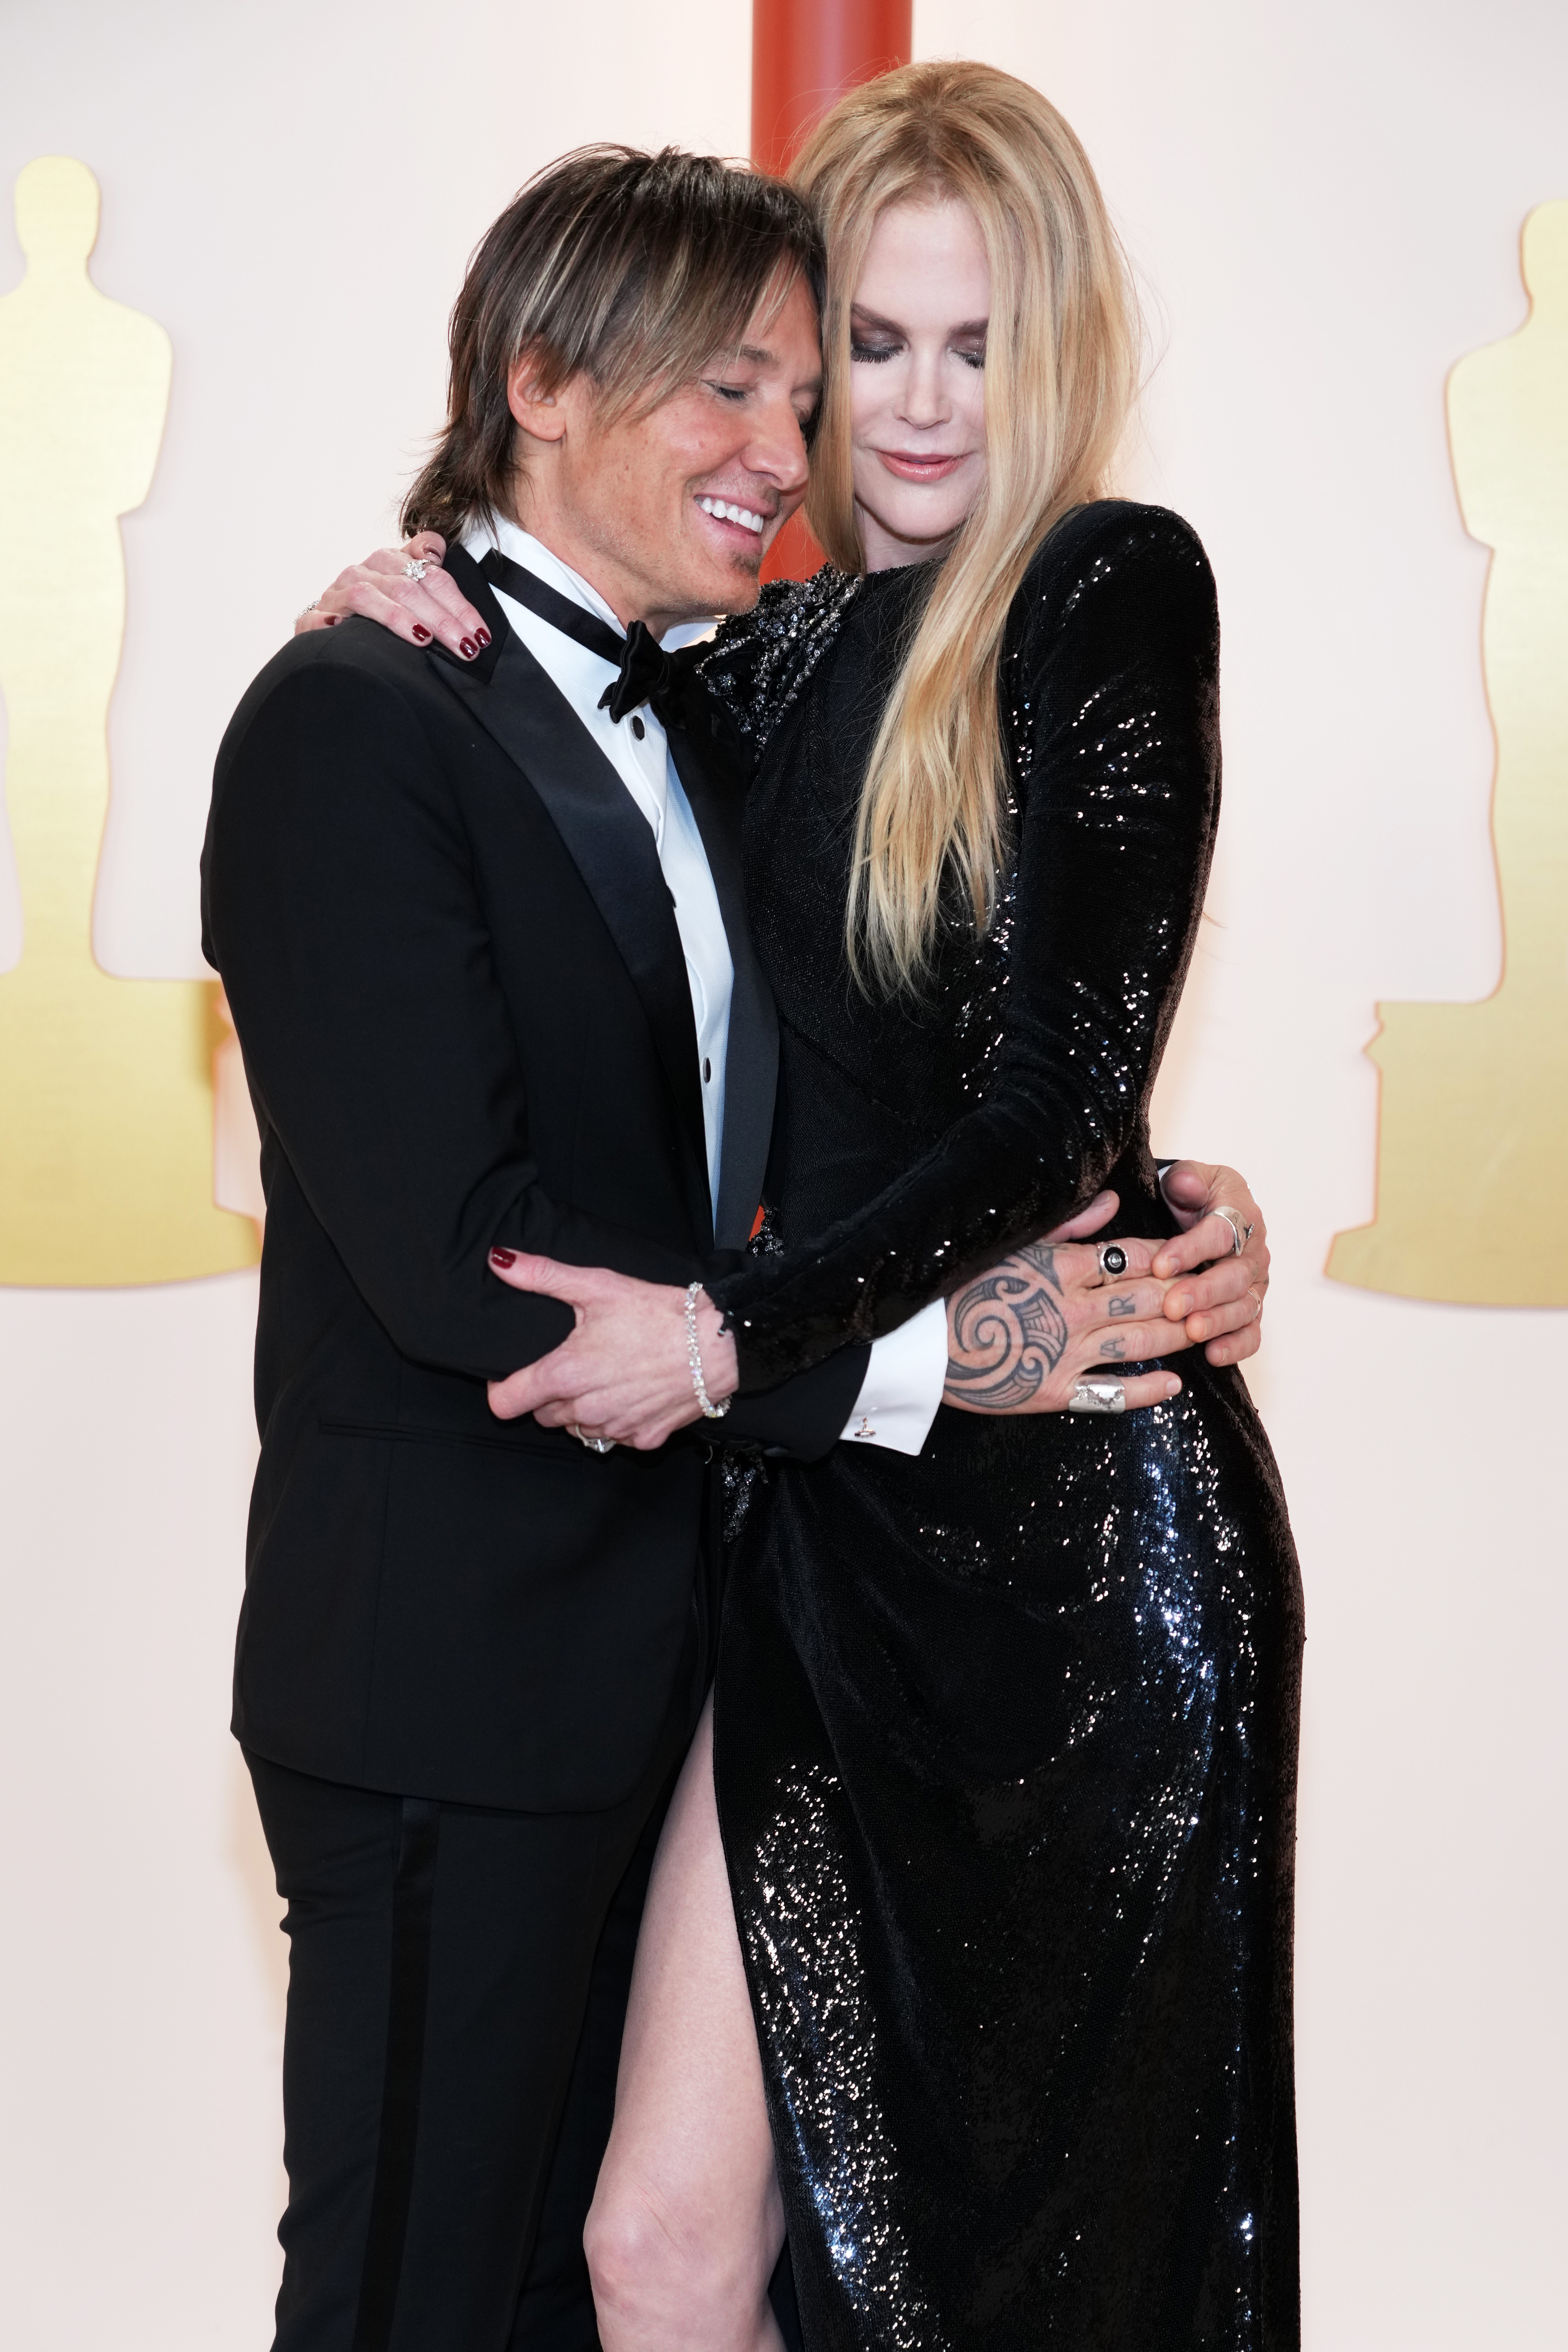 Keith Urban and Nicole Kidman at the 95th Annual Academy Award in Hollywood, California on March 12, 2023 | Source: Getty Images